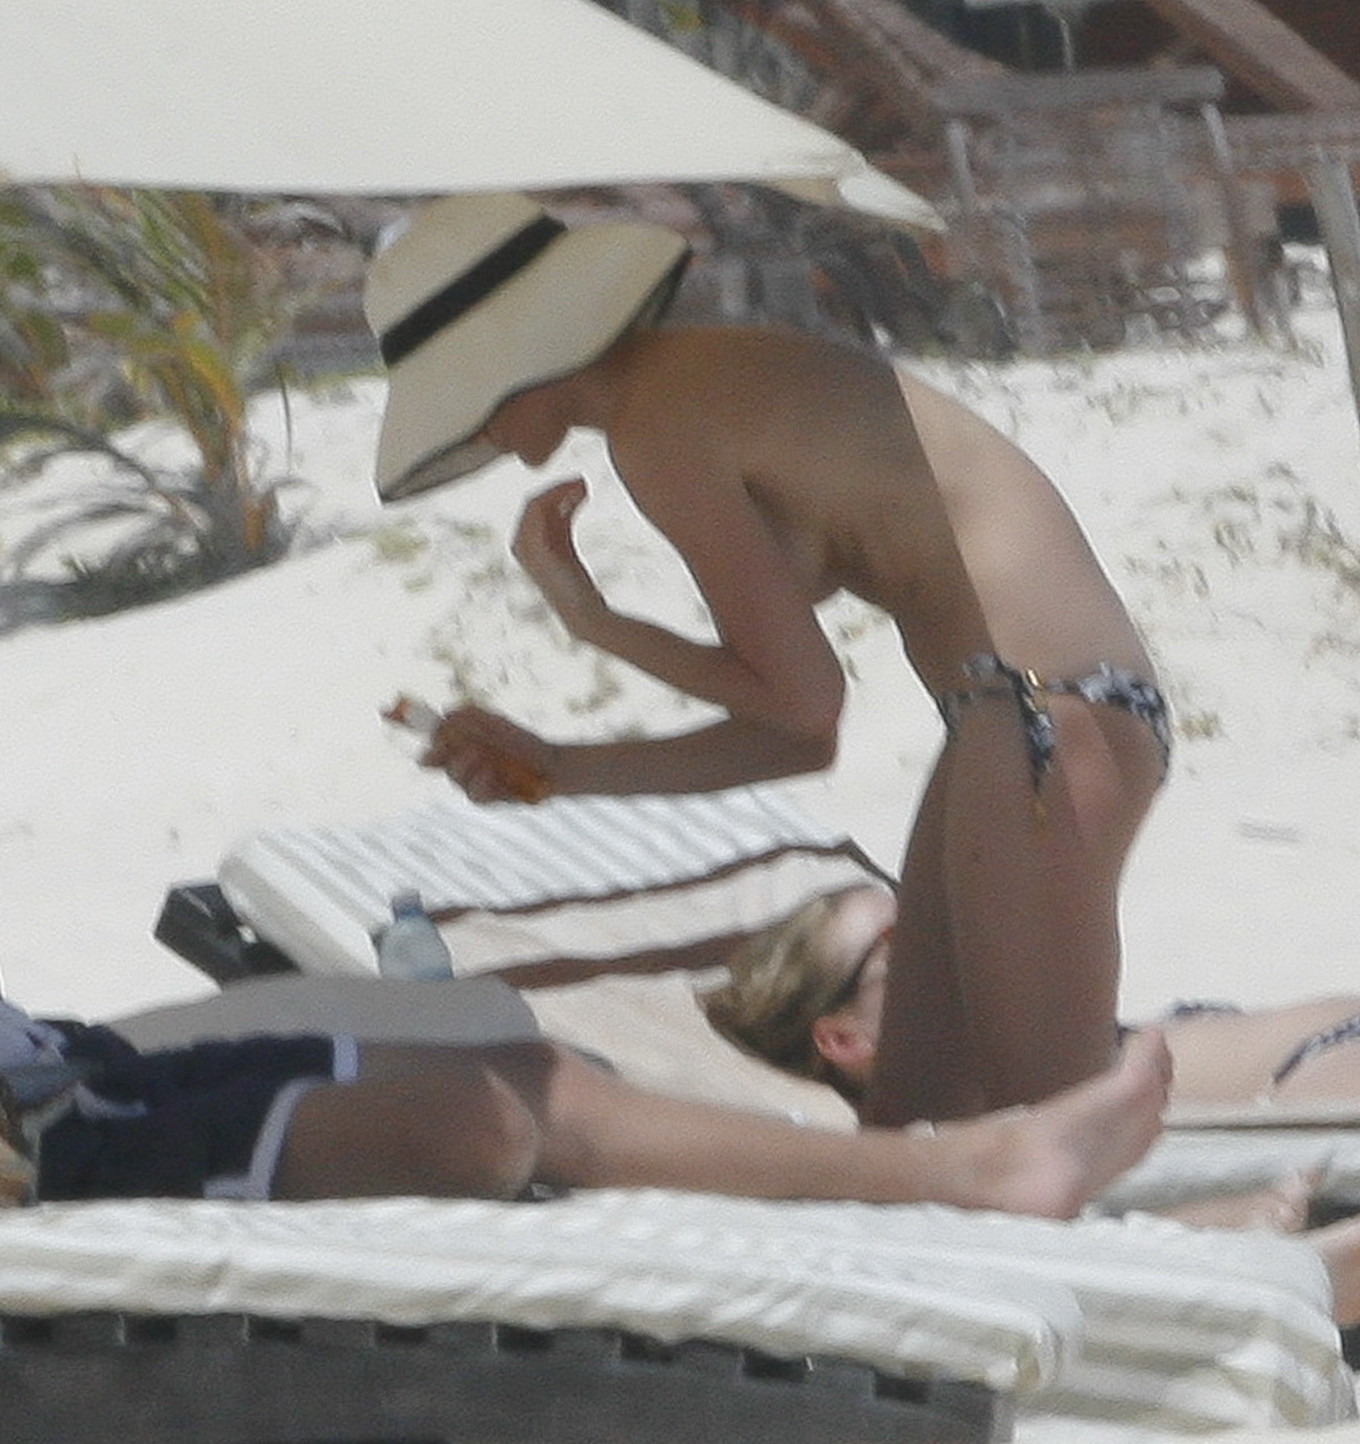 Kate Bosworth topless on the beach in Mexico but stupid paparazzi caught almost  #75308803